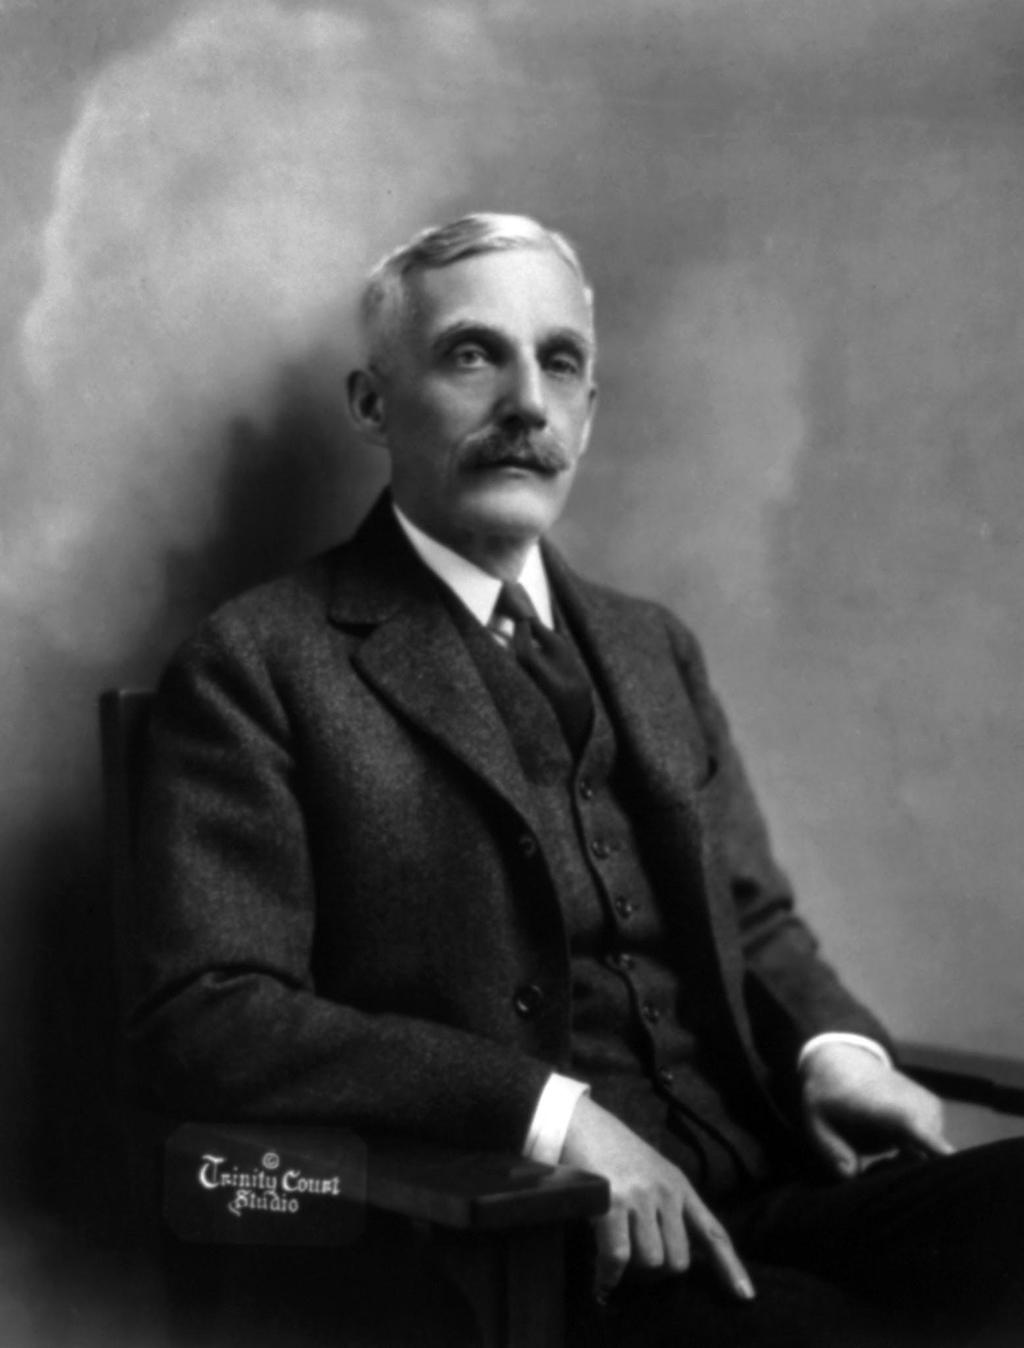 Andrew Mellon He was Coolidge s Secretary of Treasury who was a multimillionaire. He was a believer in reducing taxes for the rich.